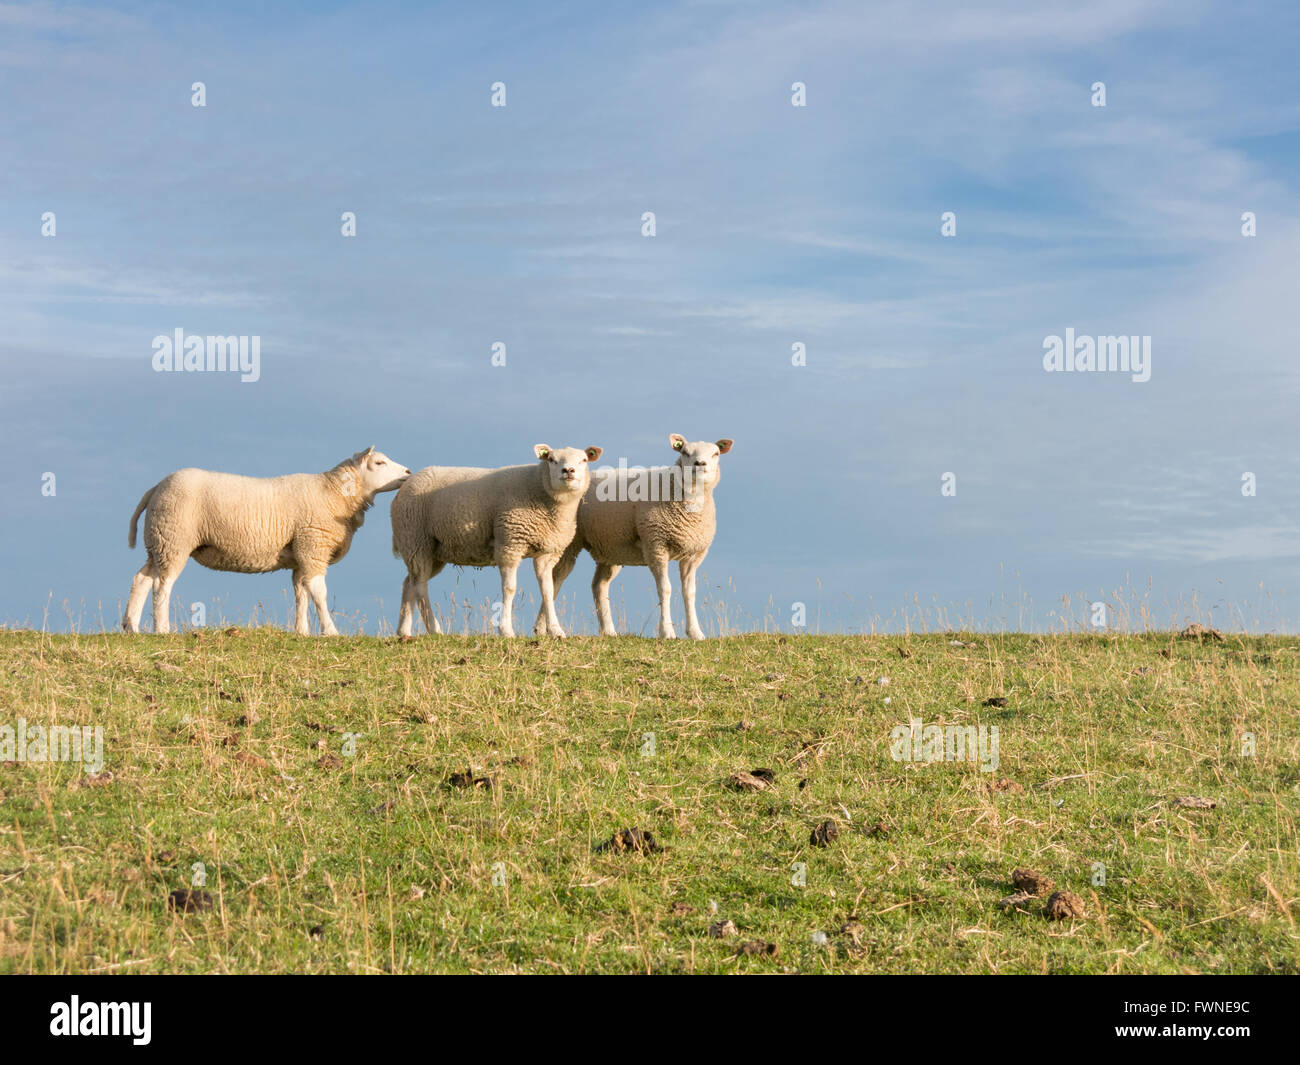 Portrait of three sheep standing side by side in a row in grass of polder dyke, Netherlands Stock Photo